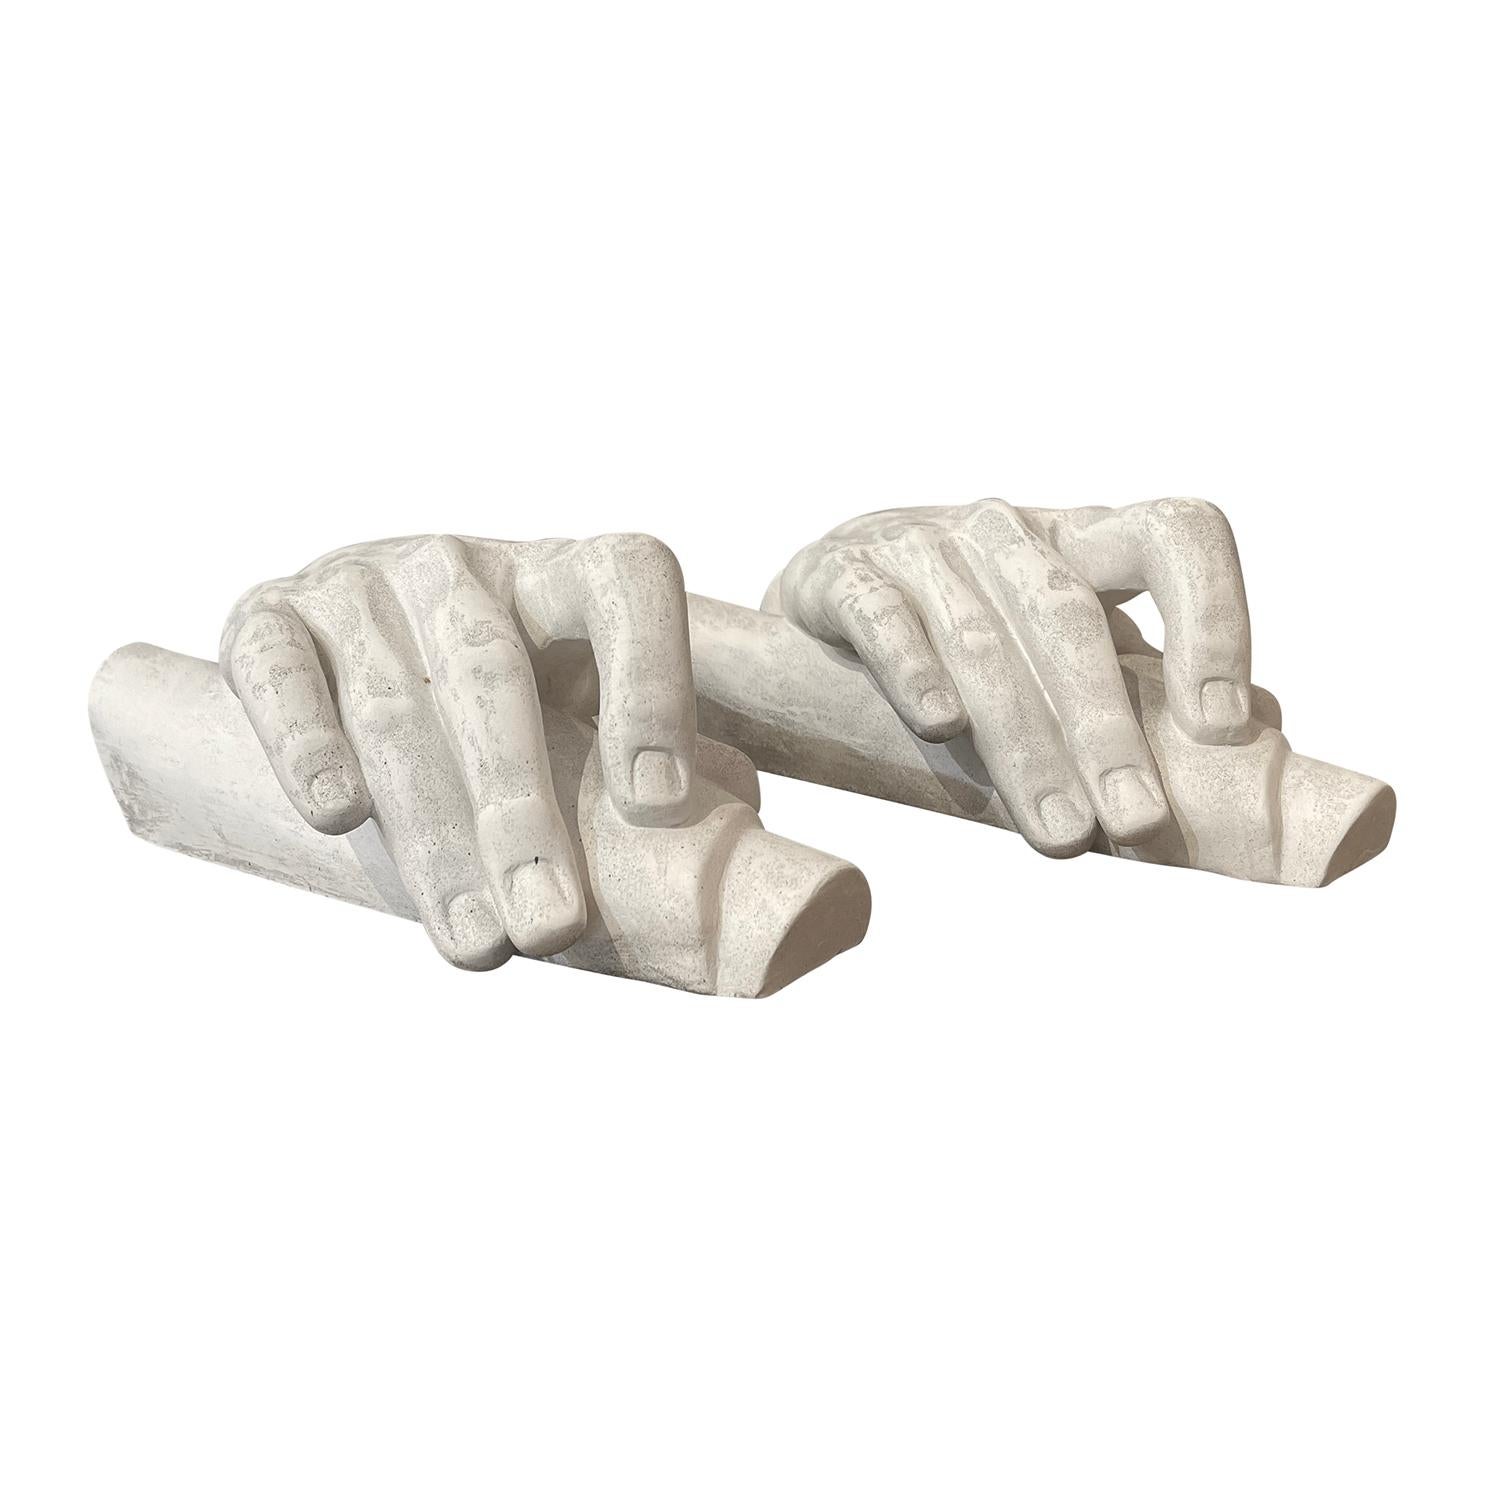 A white, vintage pair of an Anatomic study of a hand resting on a support in white French Plaster, refinished and made by hand, in good condition. Wear consistent with age and use. Circa 1930, Paris, France.